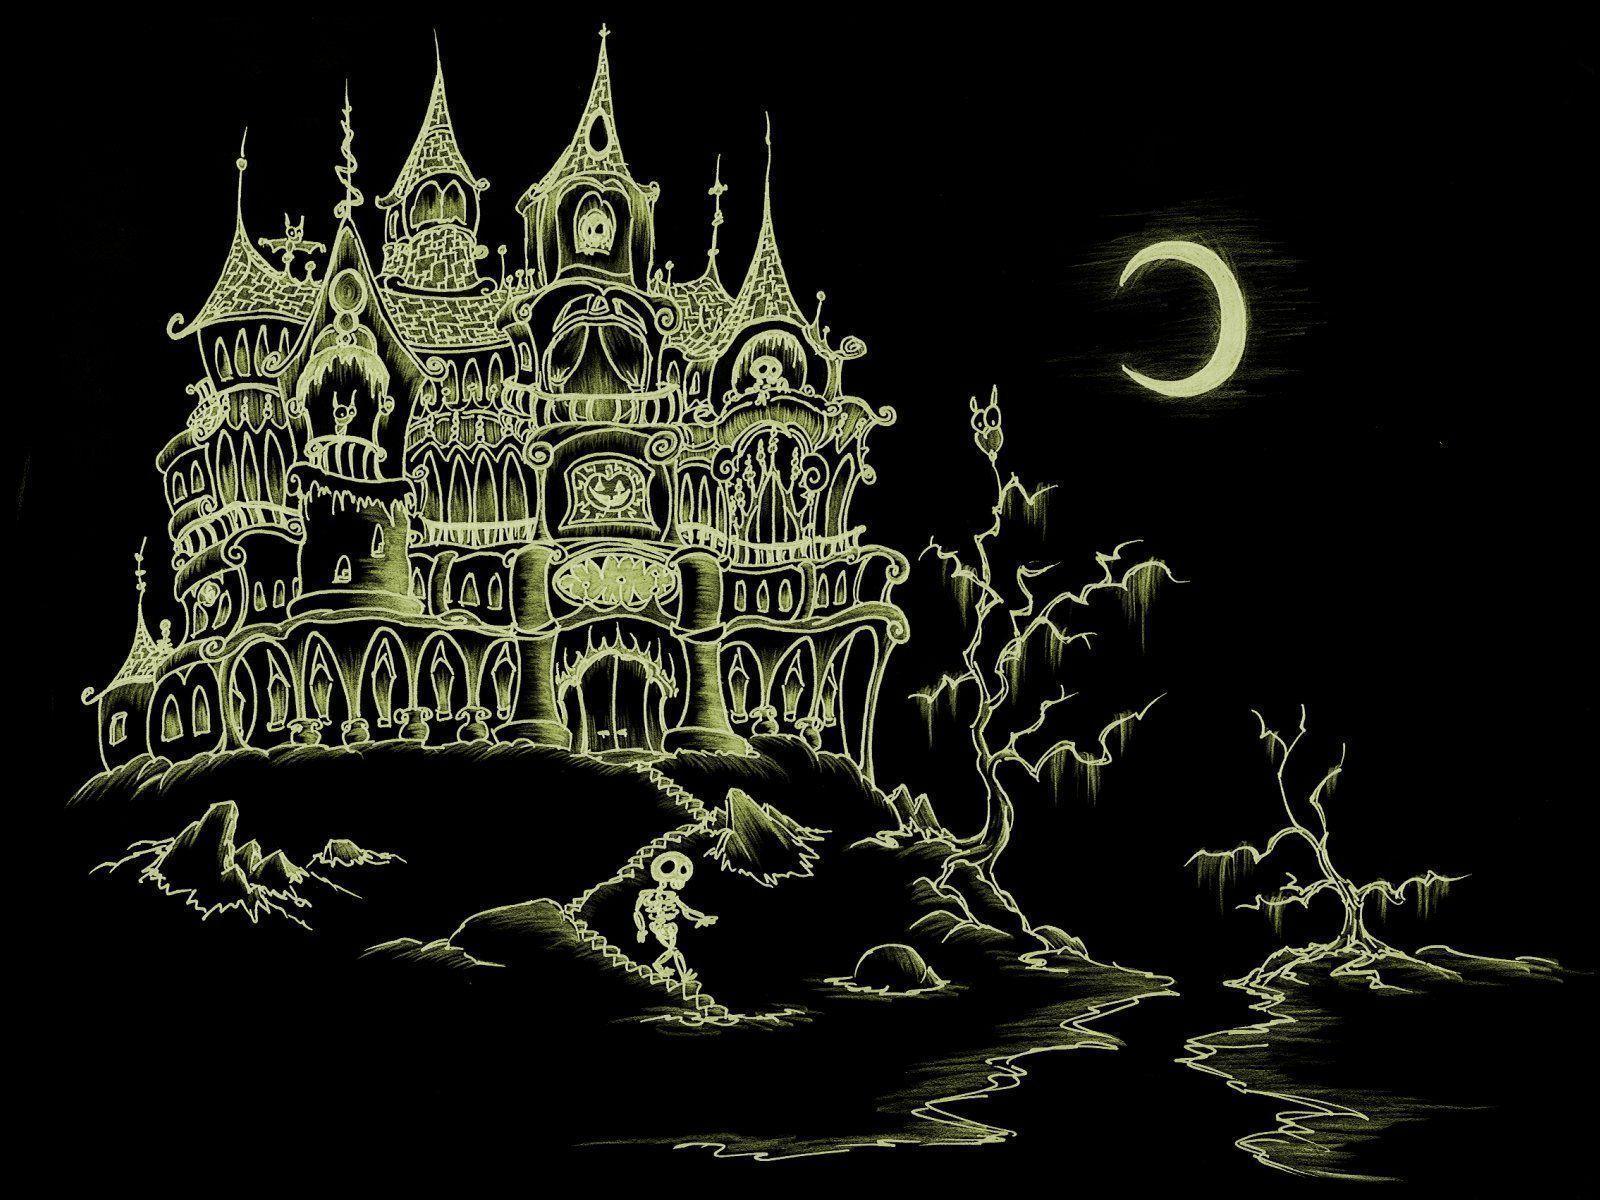 screen background: a haunted house with skeletons and bats